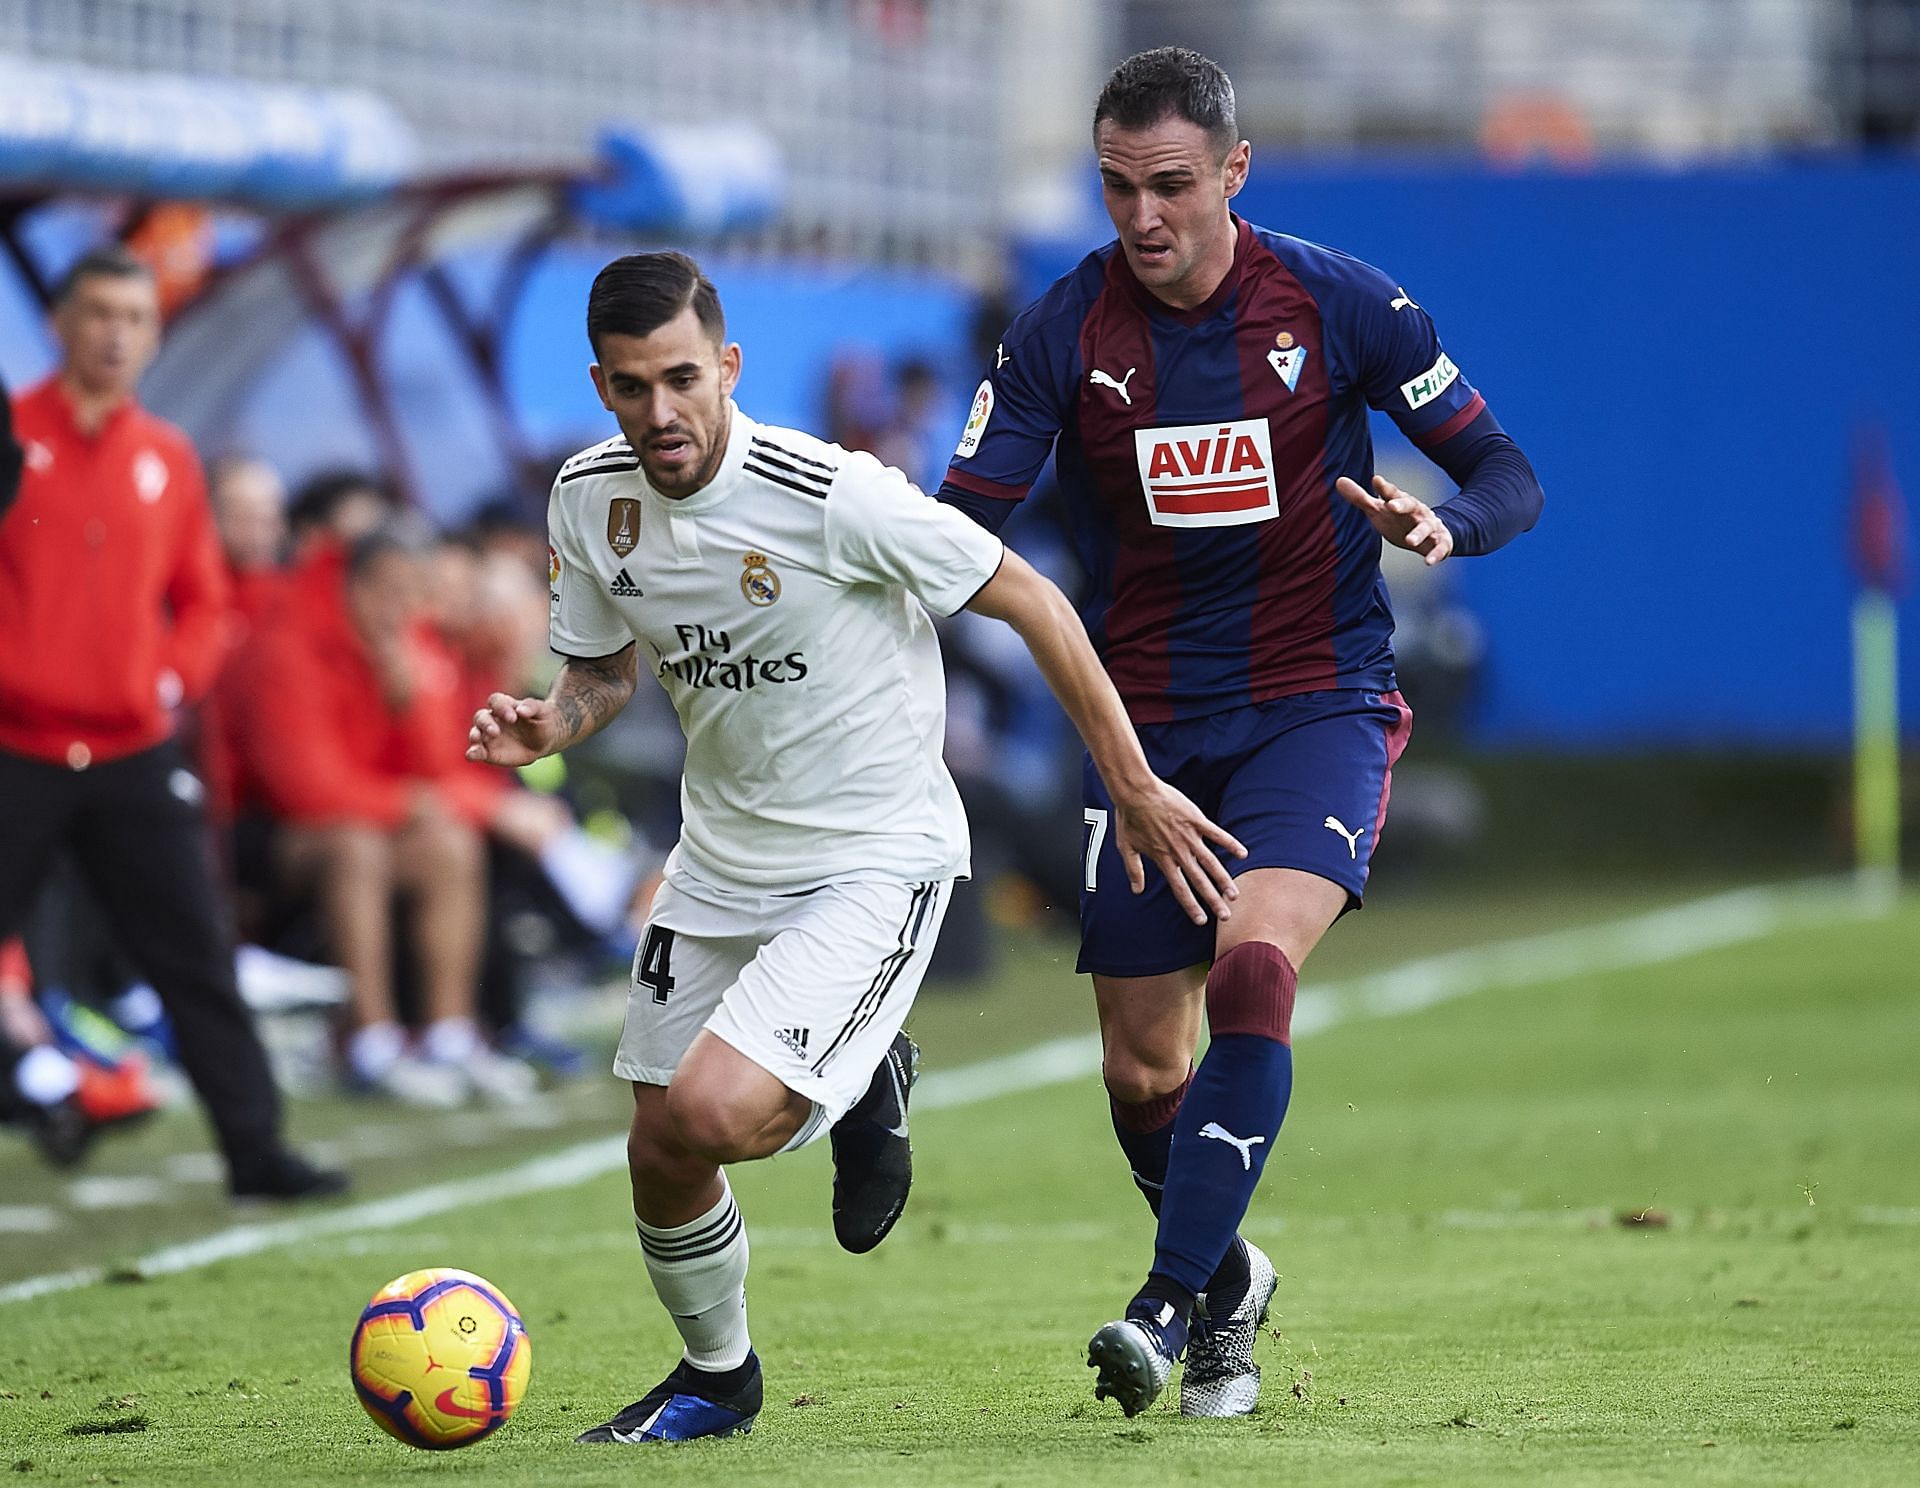 Dani Ceballos was loaned out to Arsenal in 2019